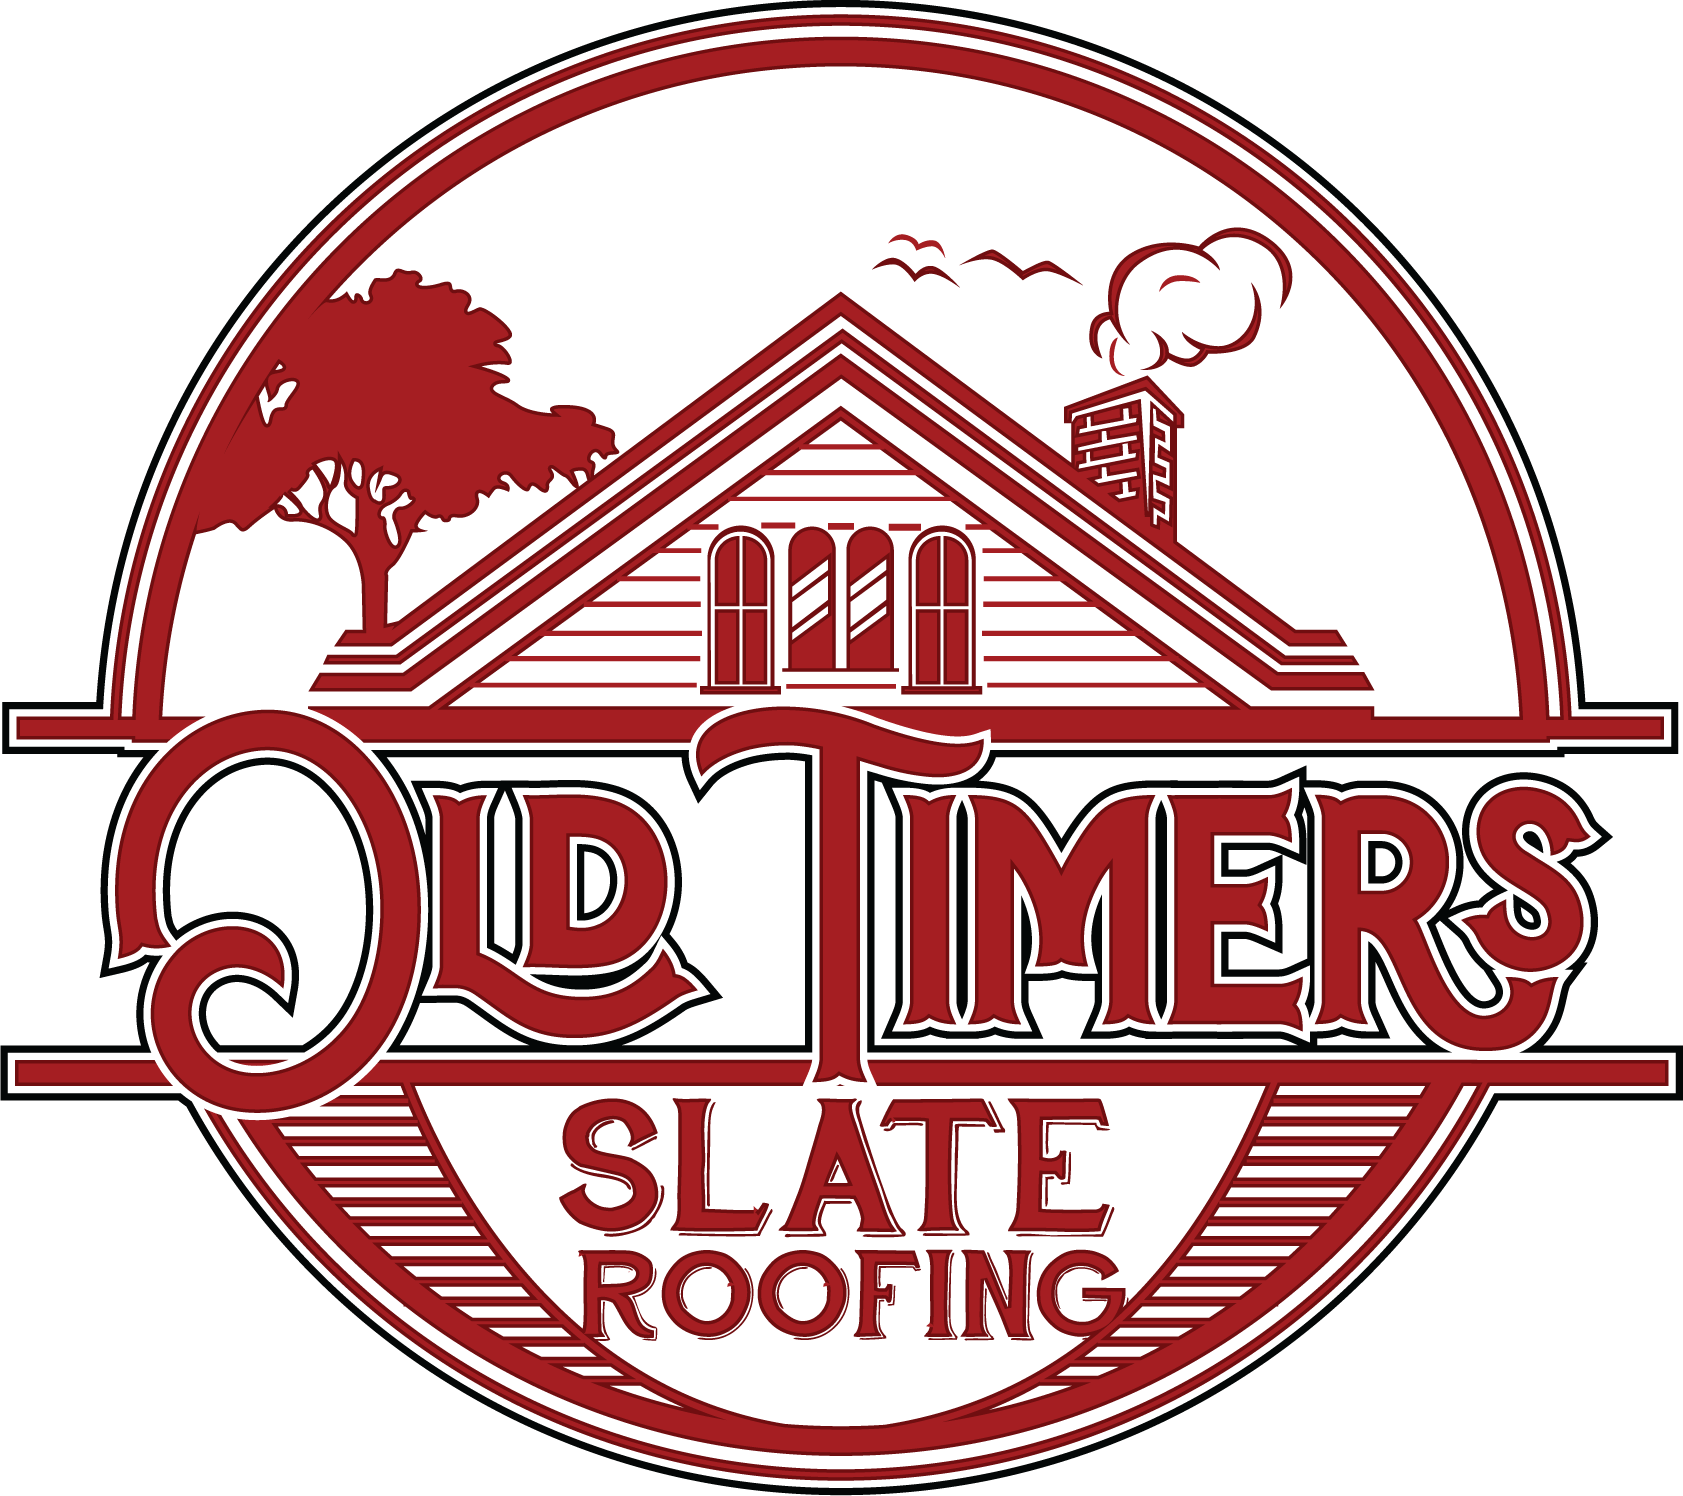 Old Timers Slate Roofing Co. Logo